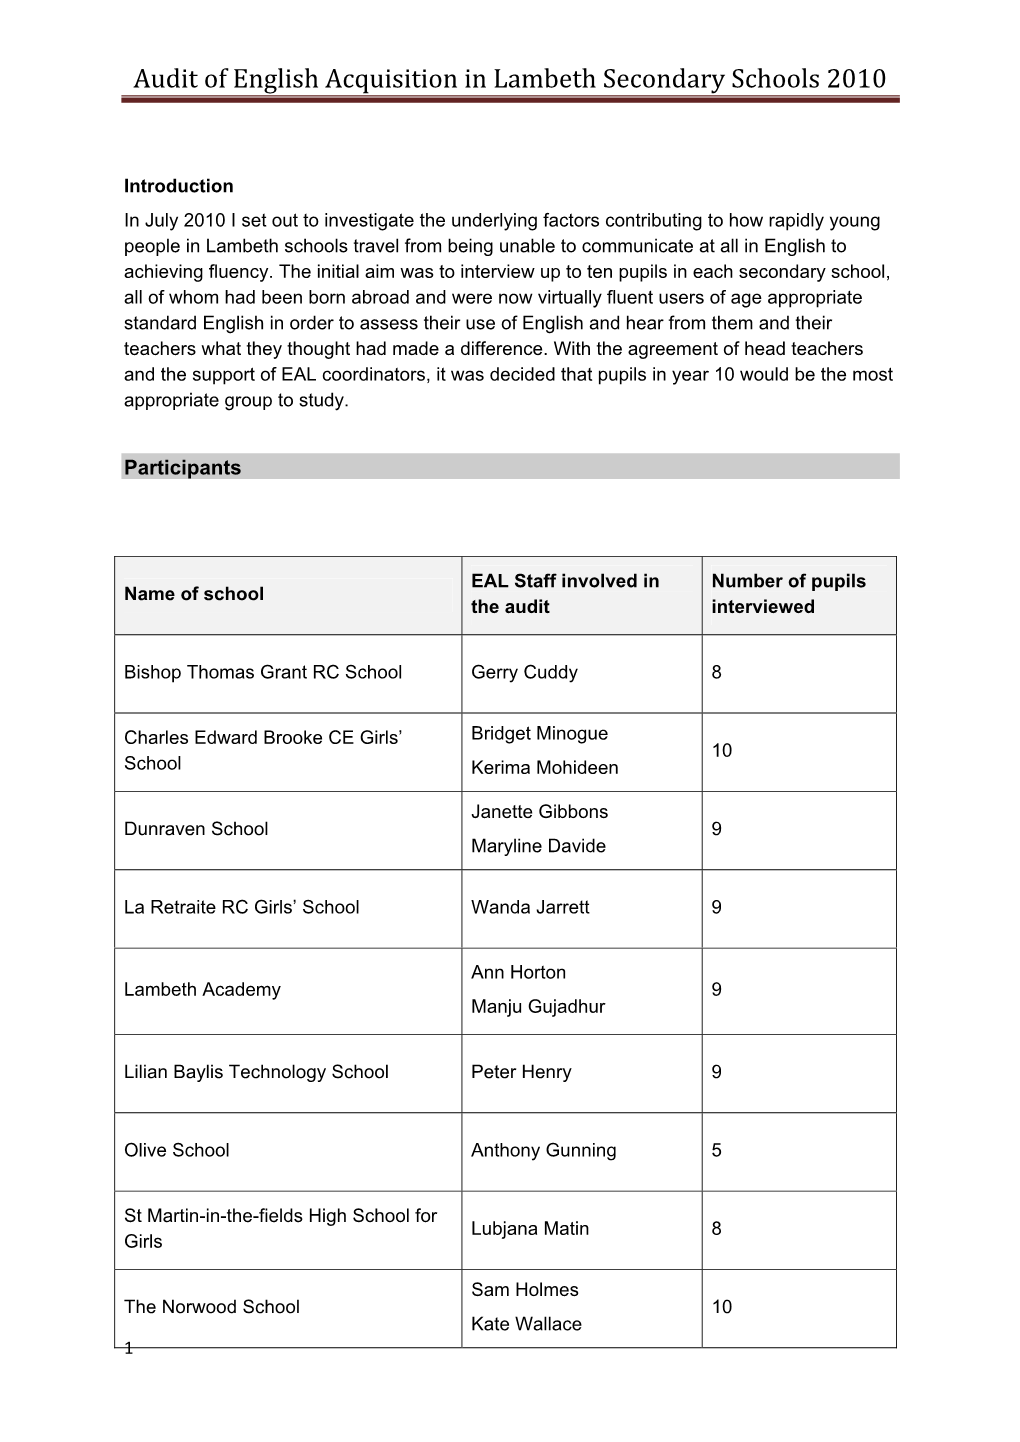 Audit of English Acquisition in Lambeth Secondary Schools 2010